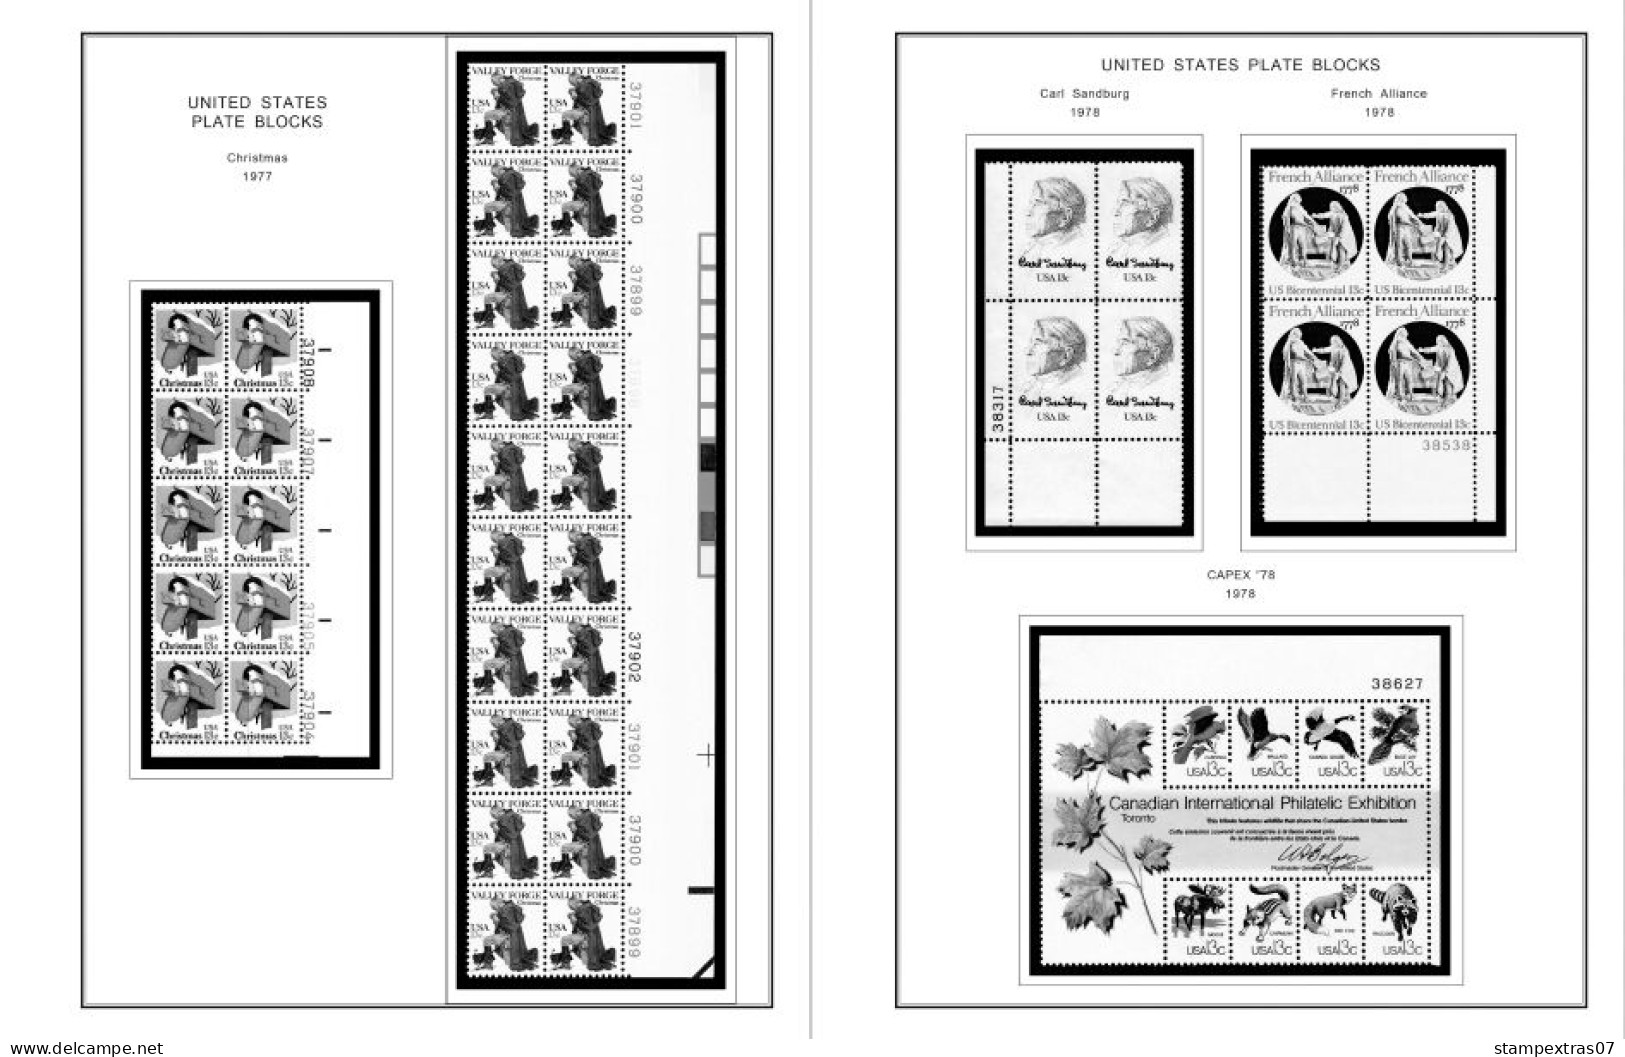 US 1970-1979 PLATE BLOCKS STAMP ALBUM PAGES (112 b&w illustrated pages)